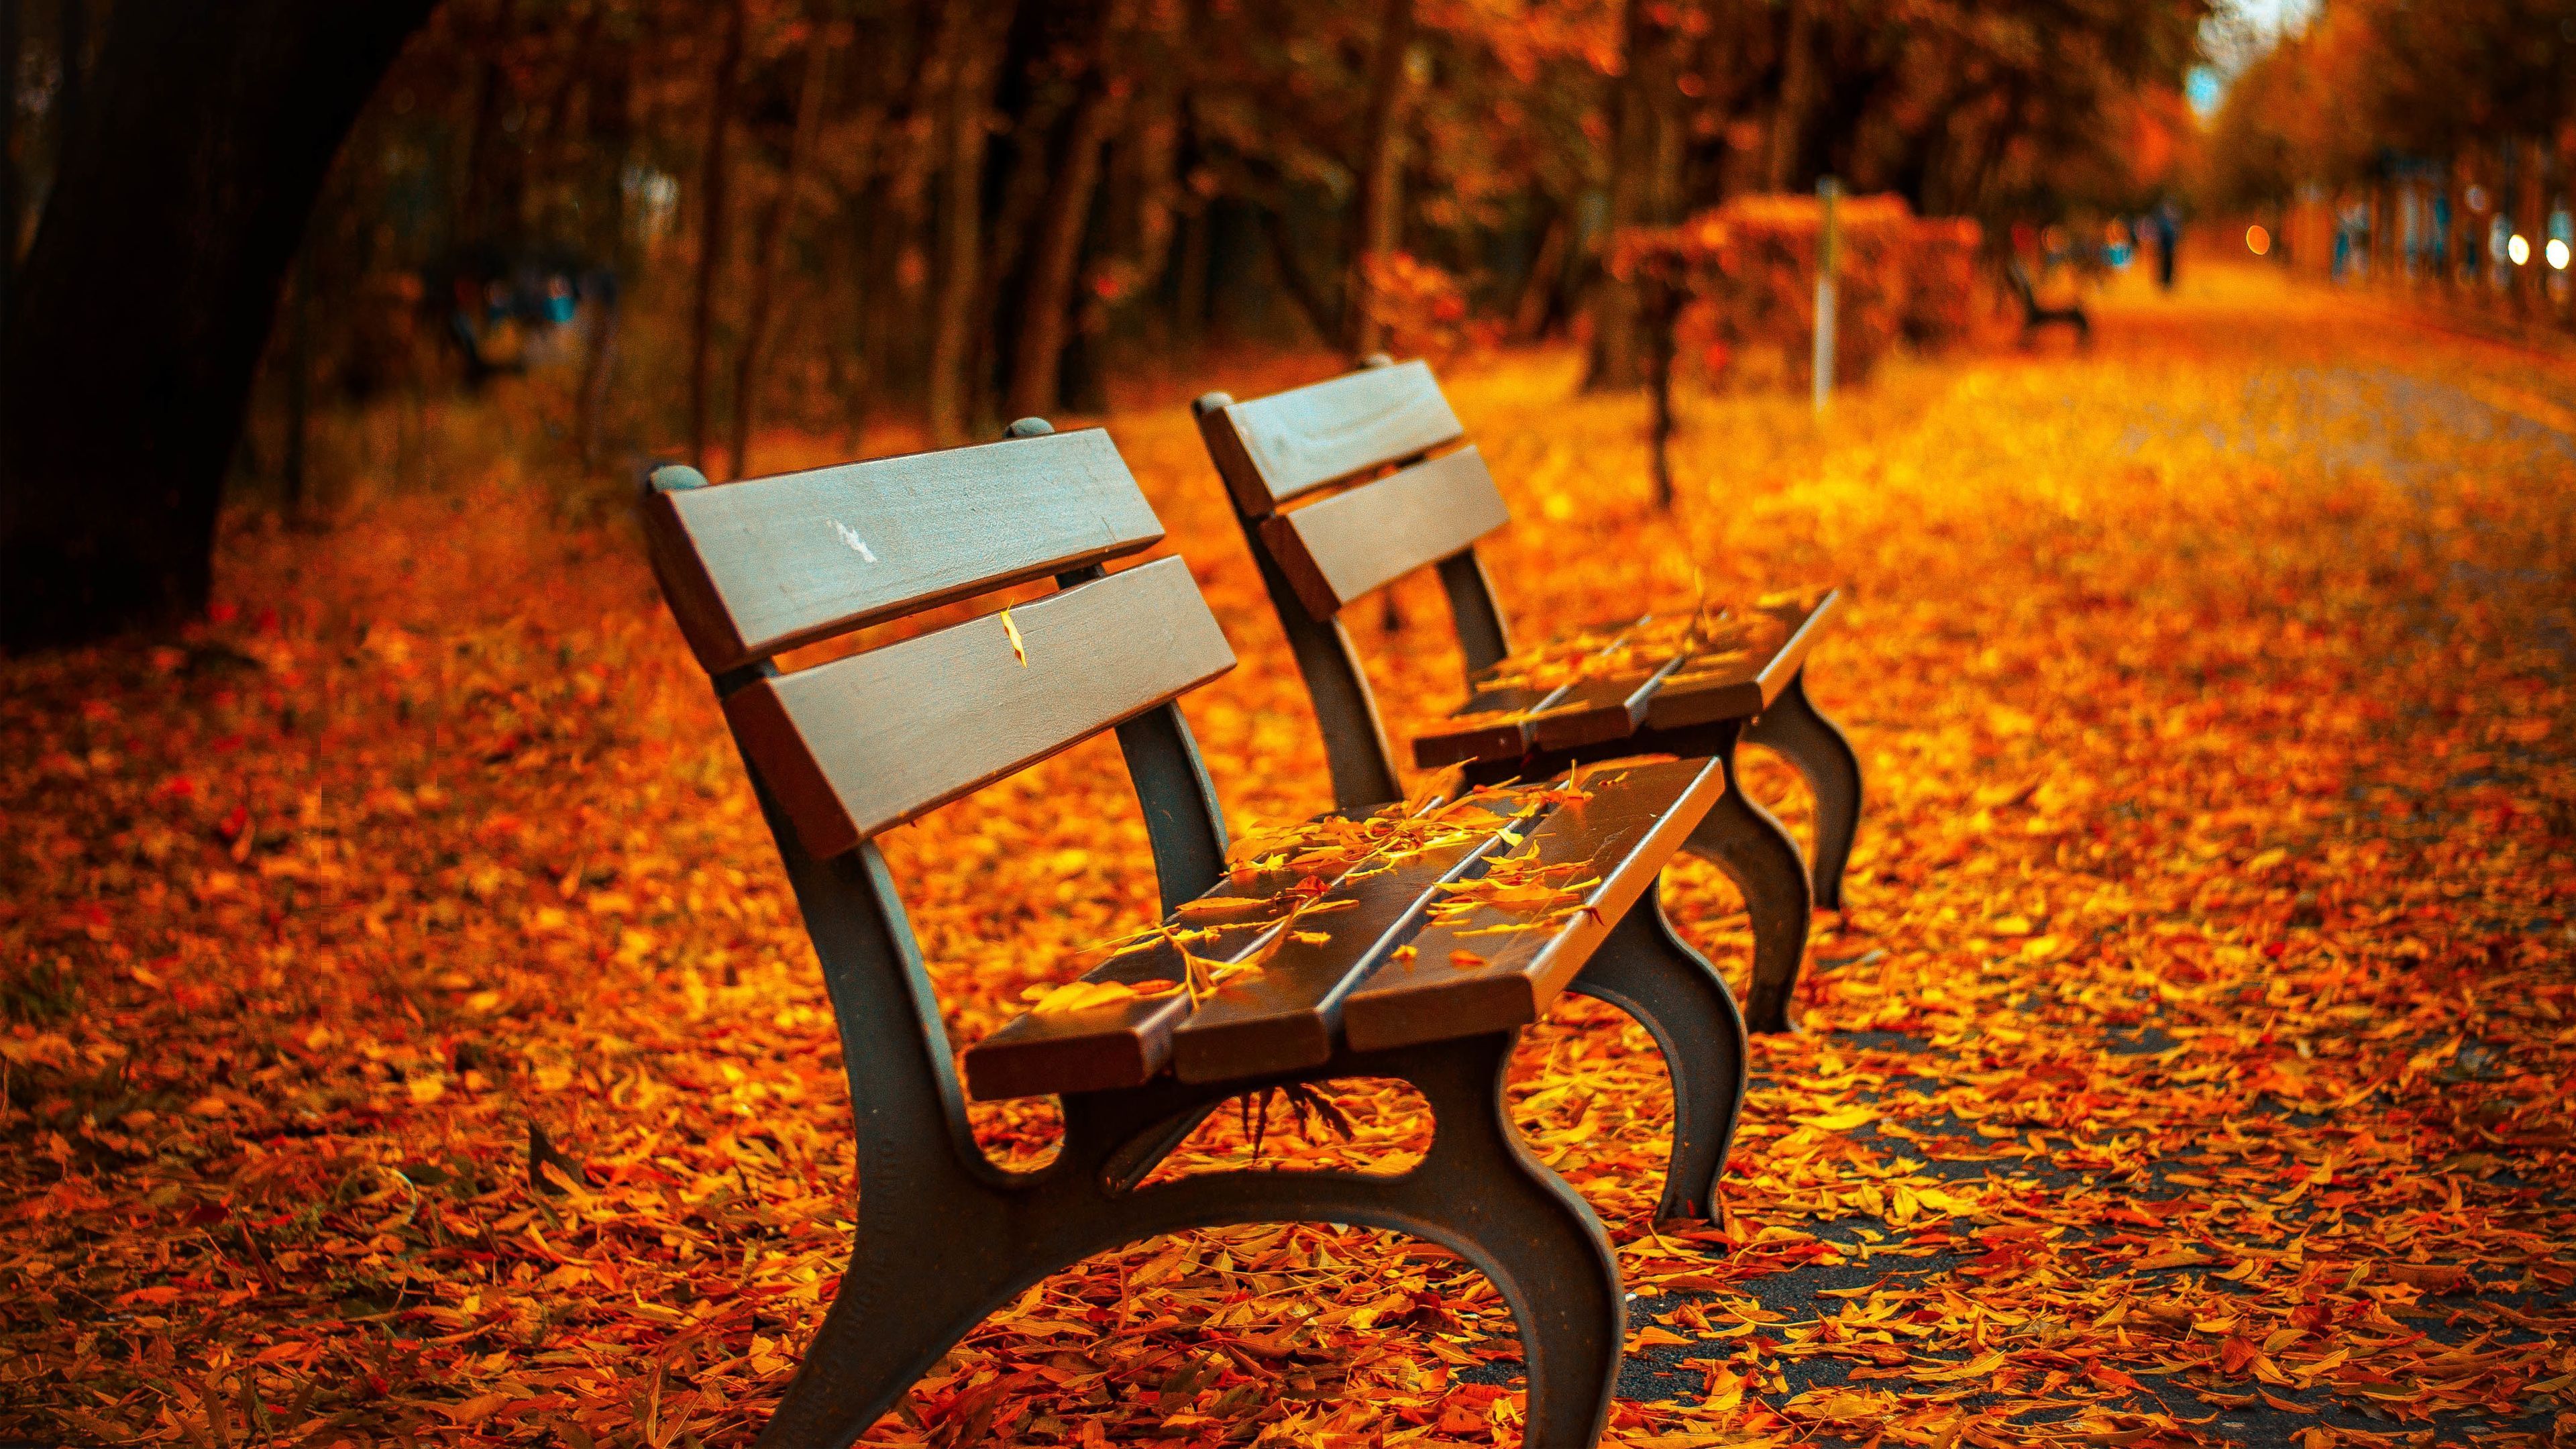 Wallpaper Tagged With AUTUMN. Download Wallpaper